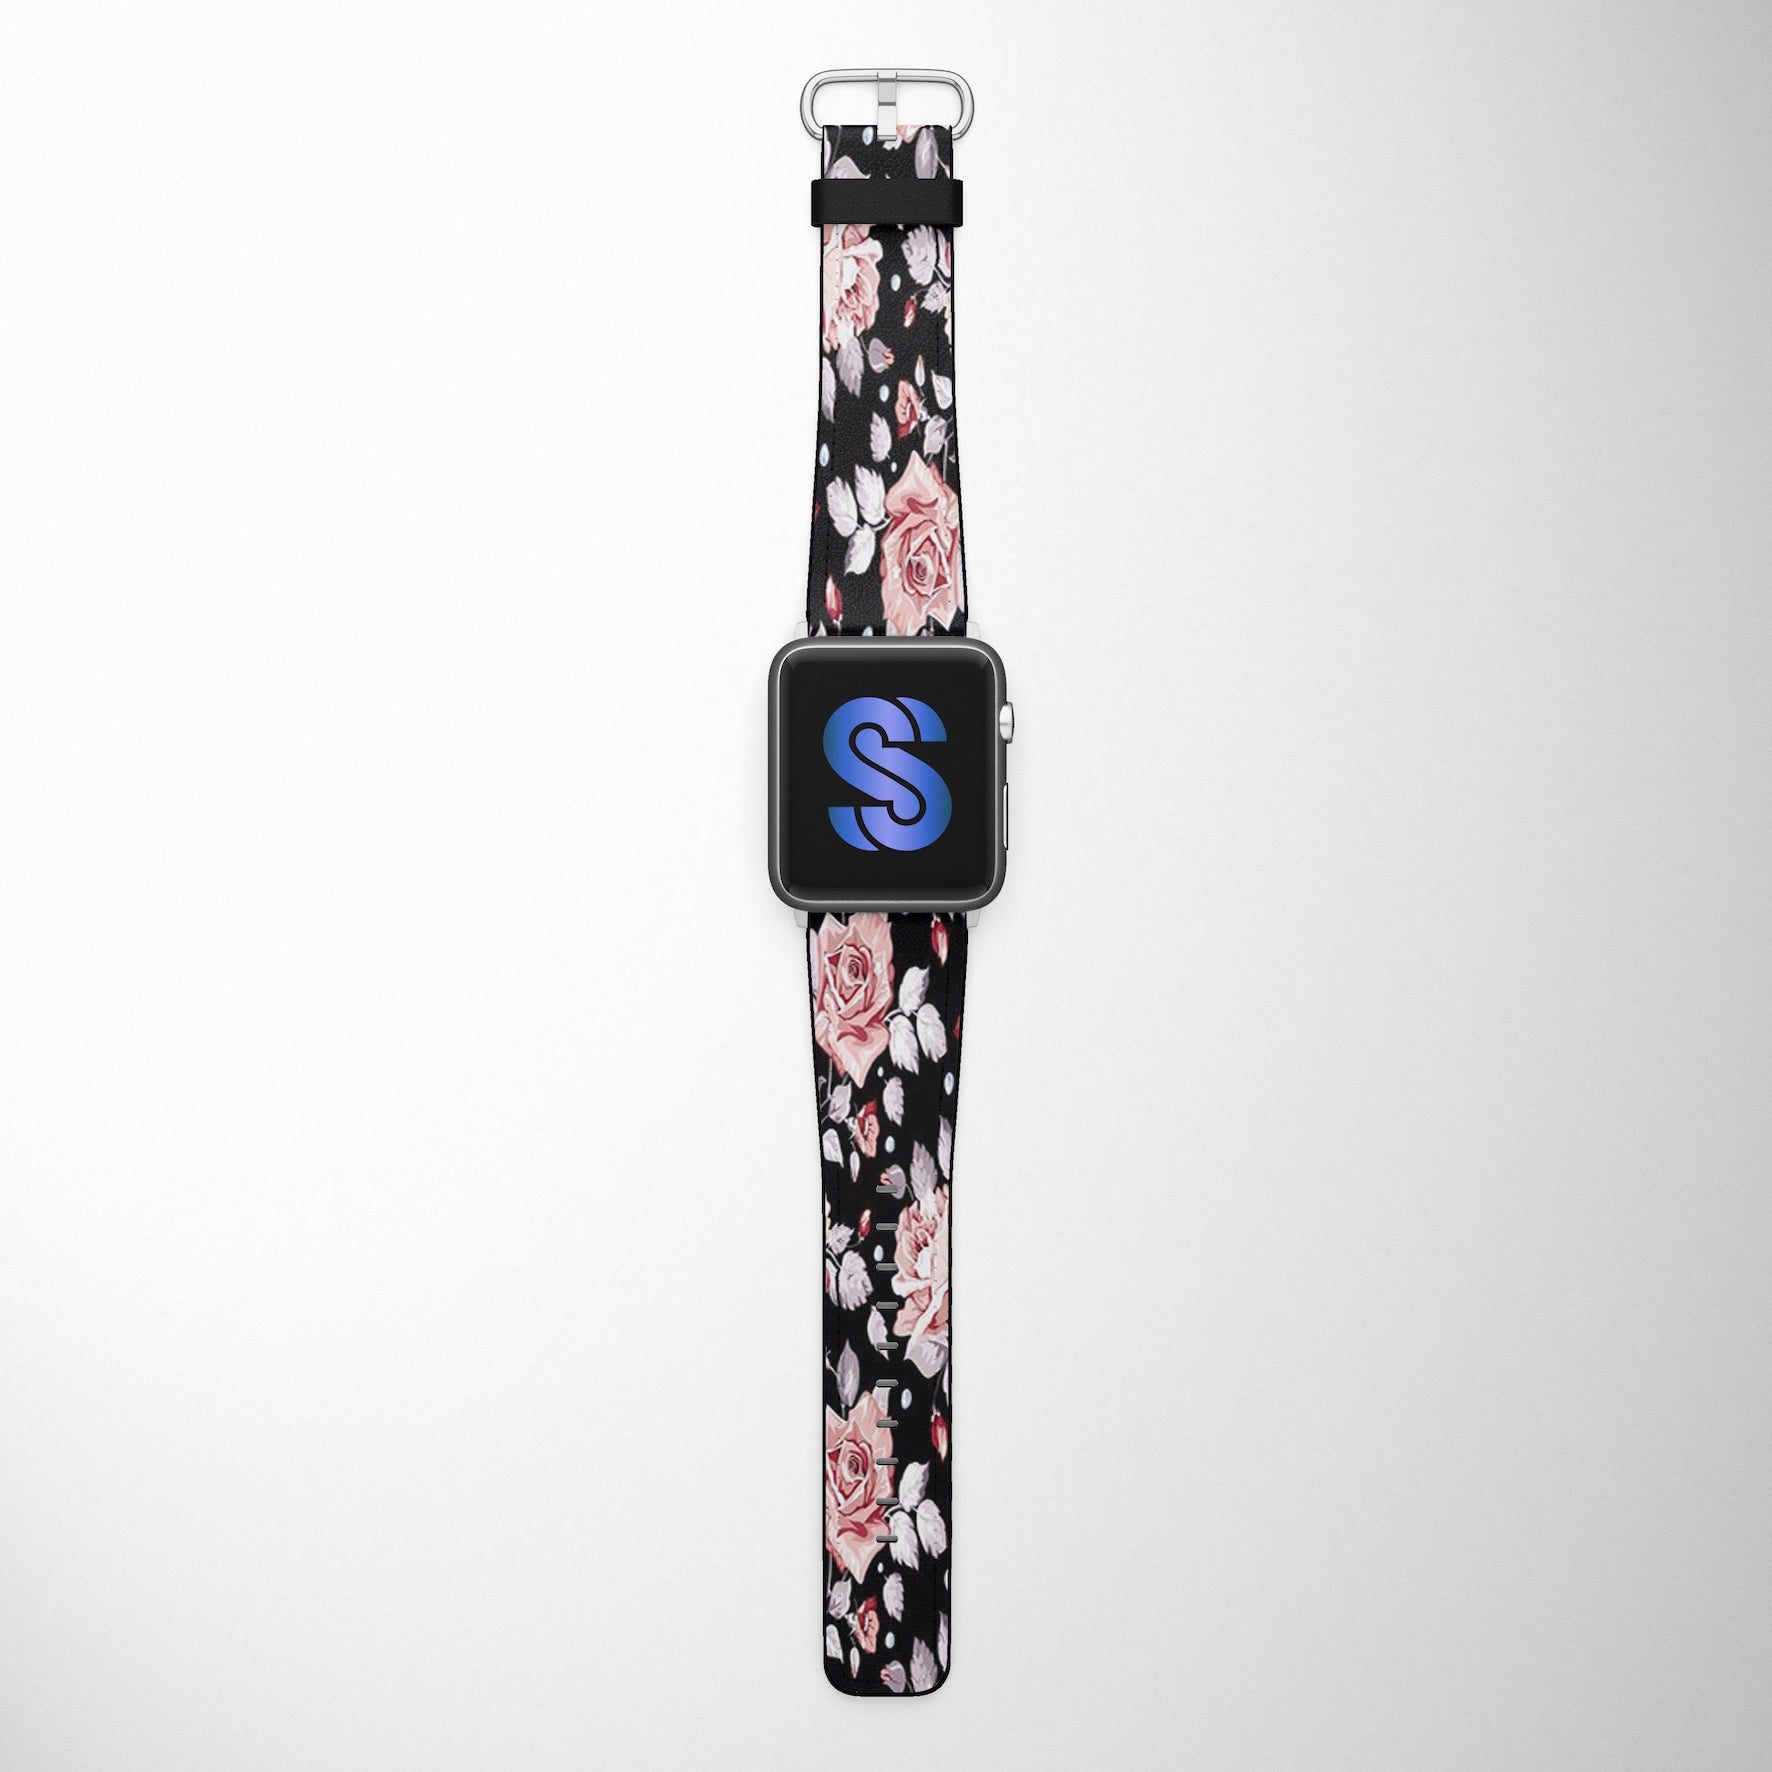 Roses On Black Faux Leather Apple Watch Band for Apple Watch 1,2,3,4,5,6,SE - www.scottsy.com